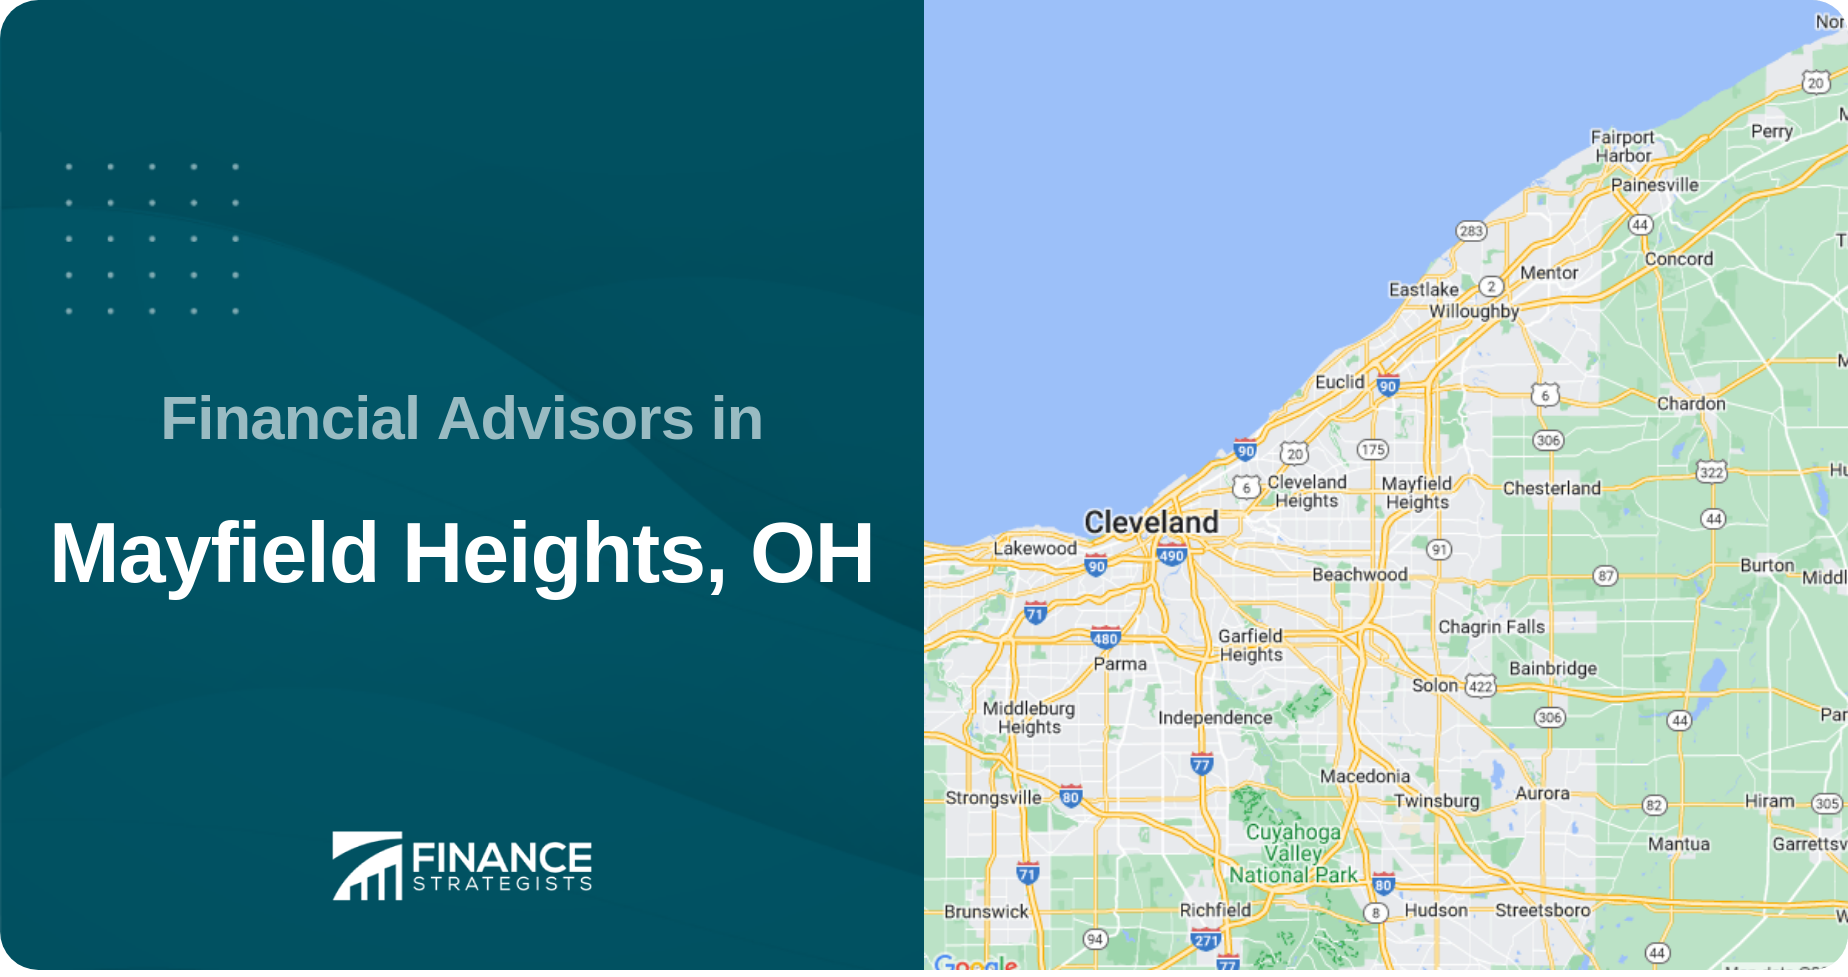 Financial Advisors in Mayfield Heights, OH